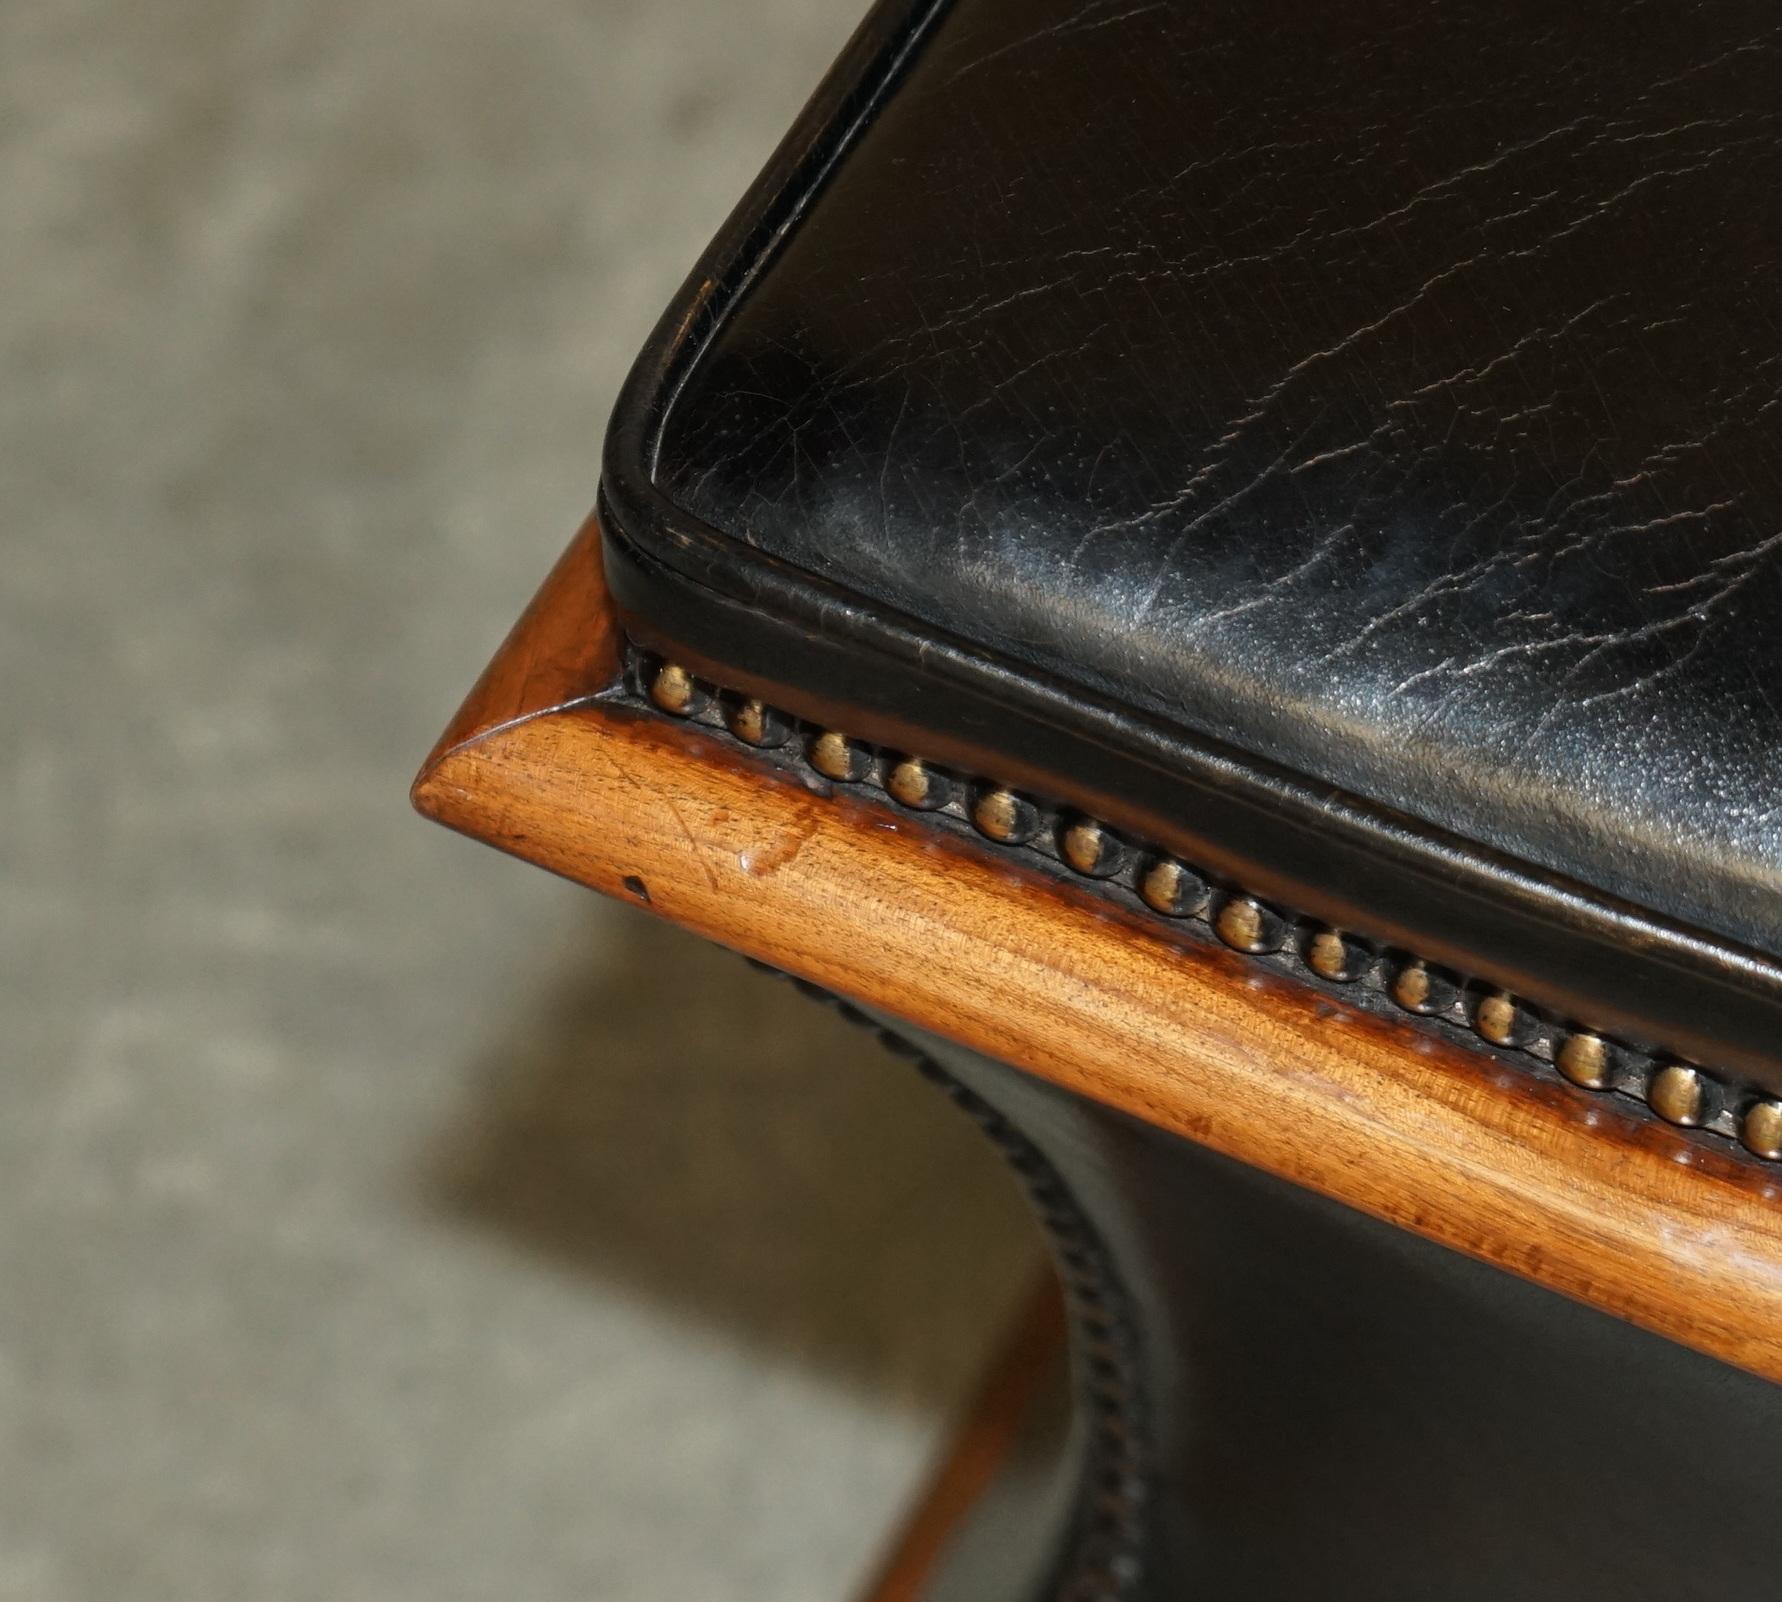 Hand-Crafted EXQUISITE VICTORIAN CiRCA 1860 TAN BLACK LEATHER OTTOMAN STOOL FOOTSTOOL STORAGE For Sale